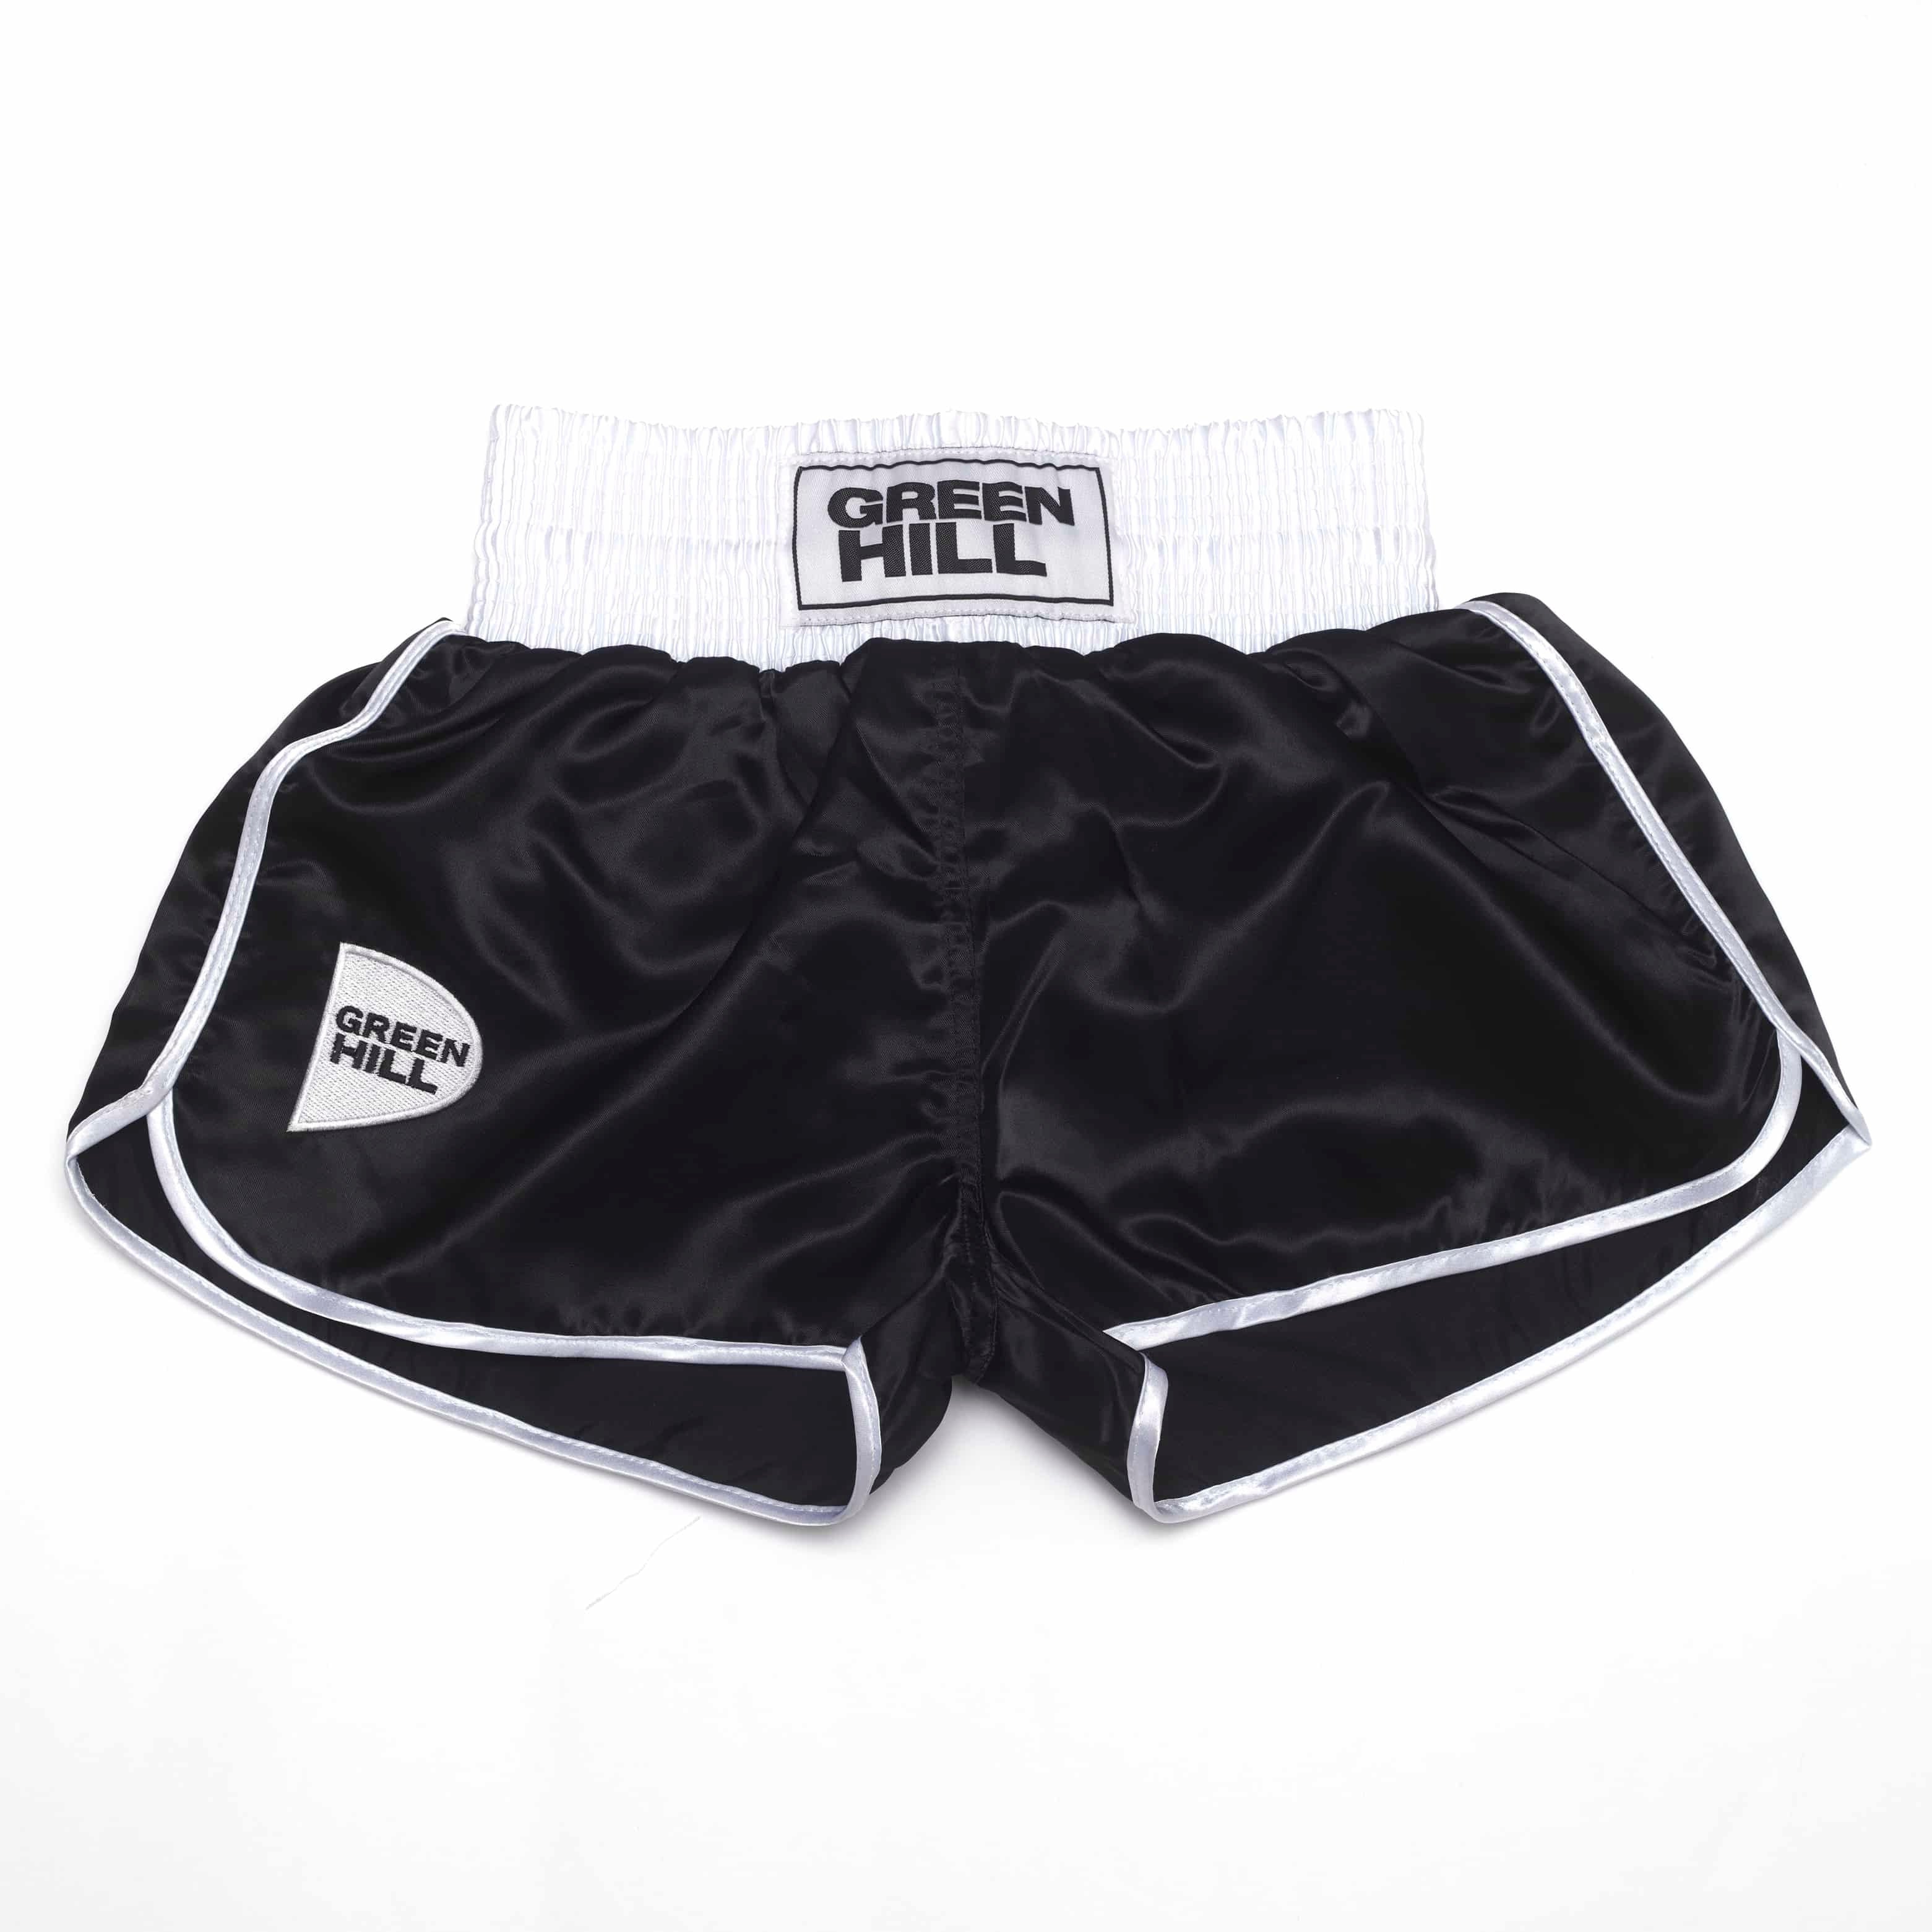 Boxing Shorts “Lucy”